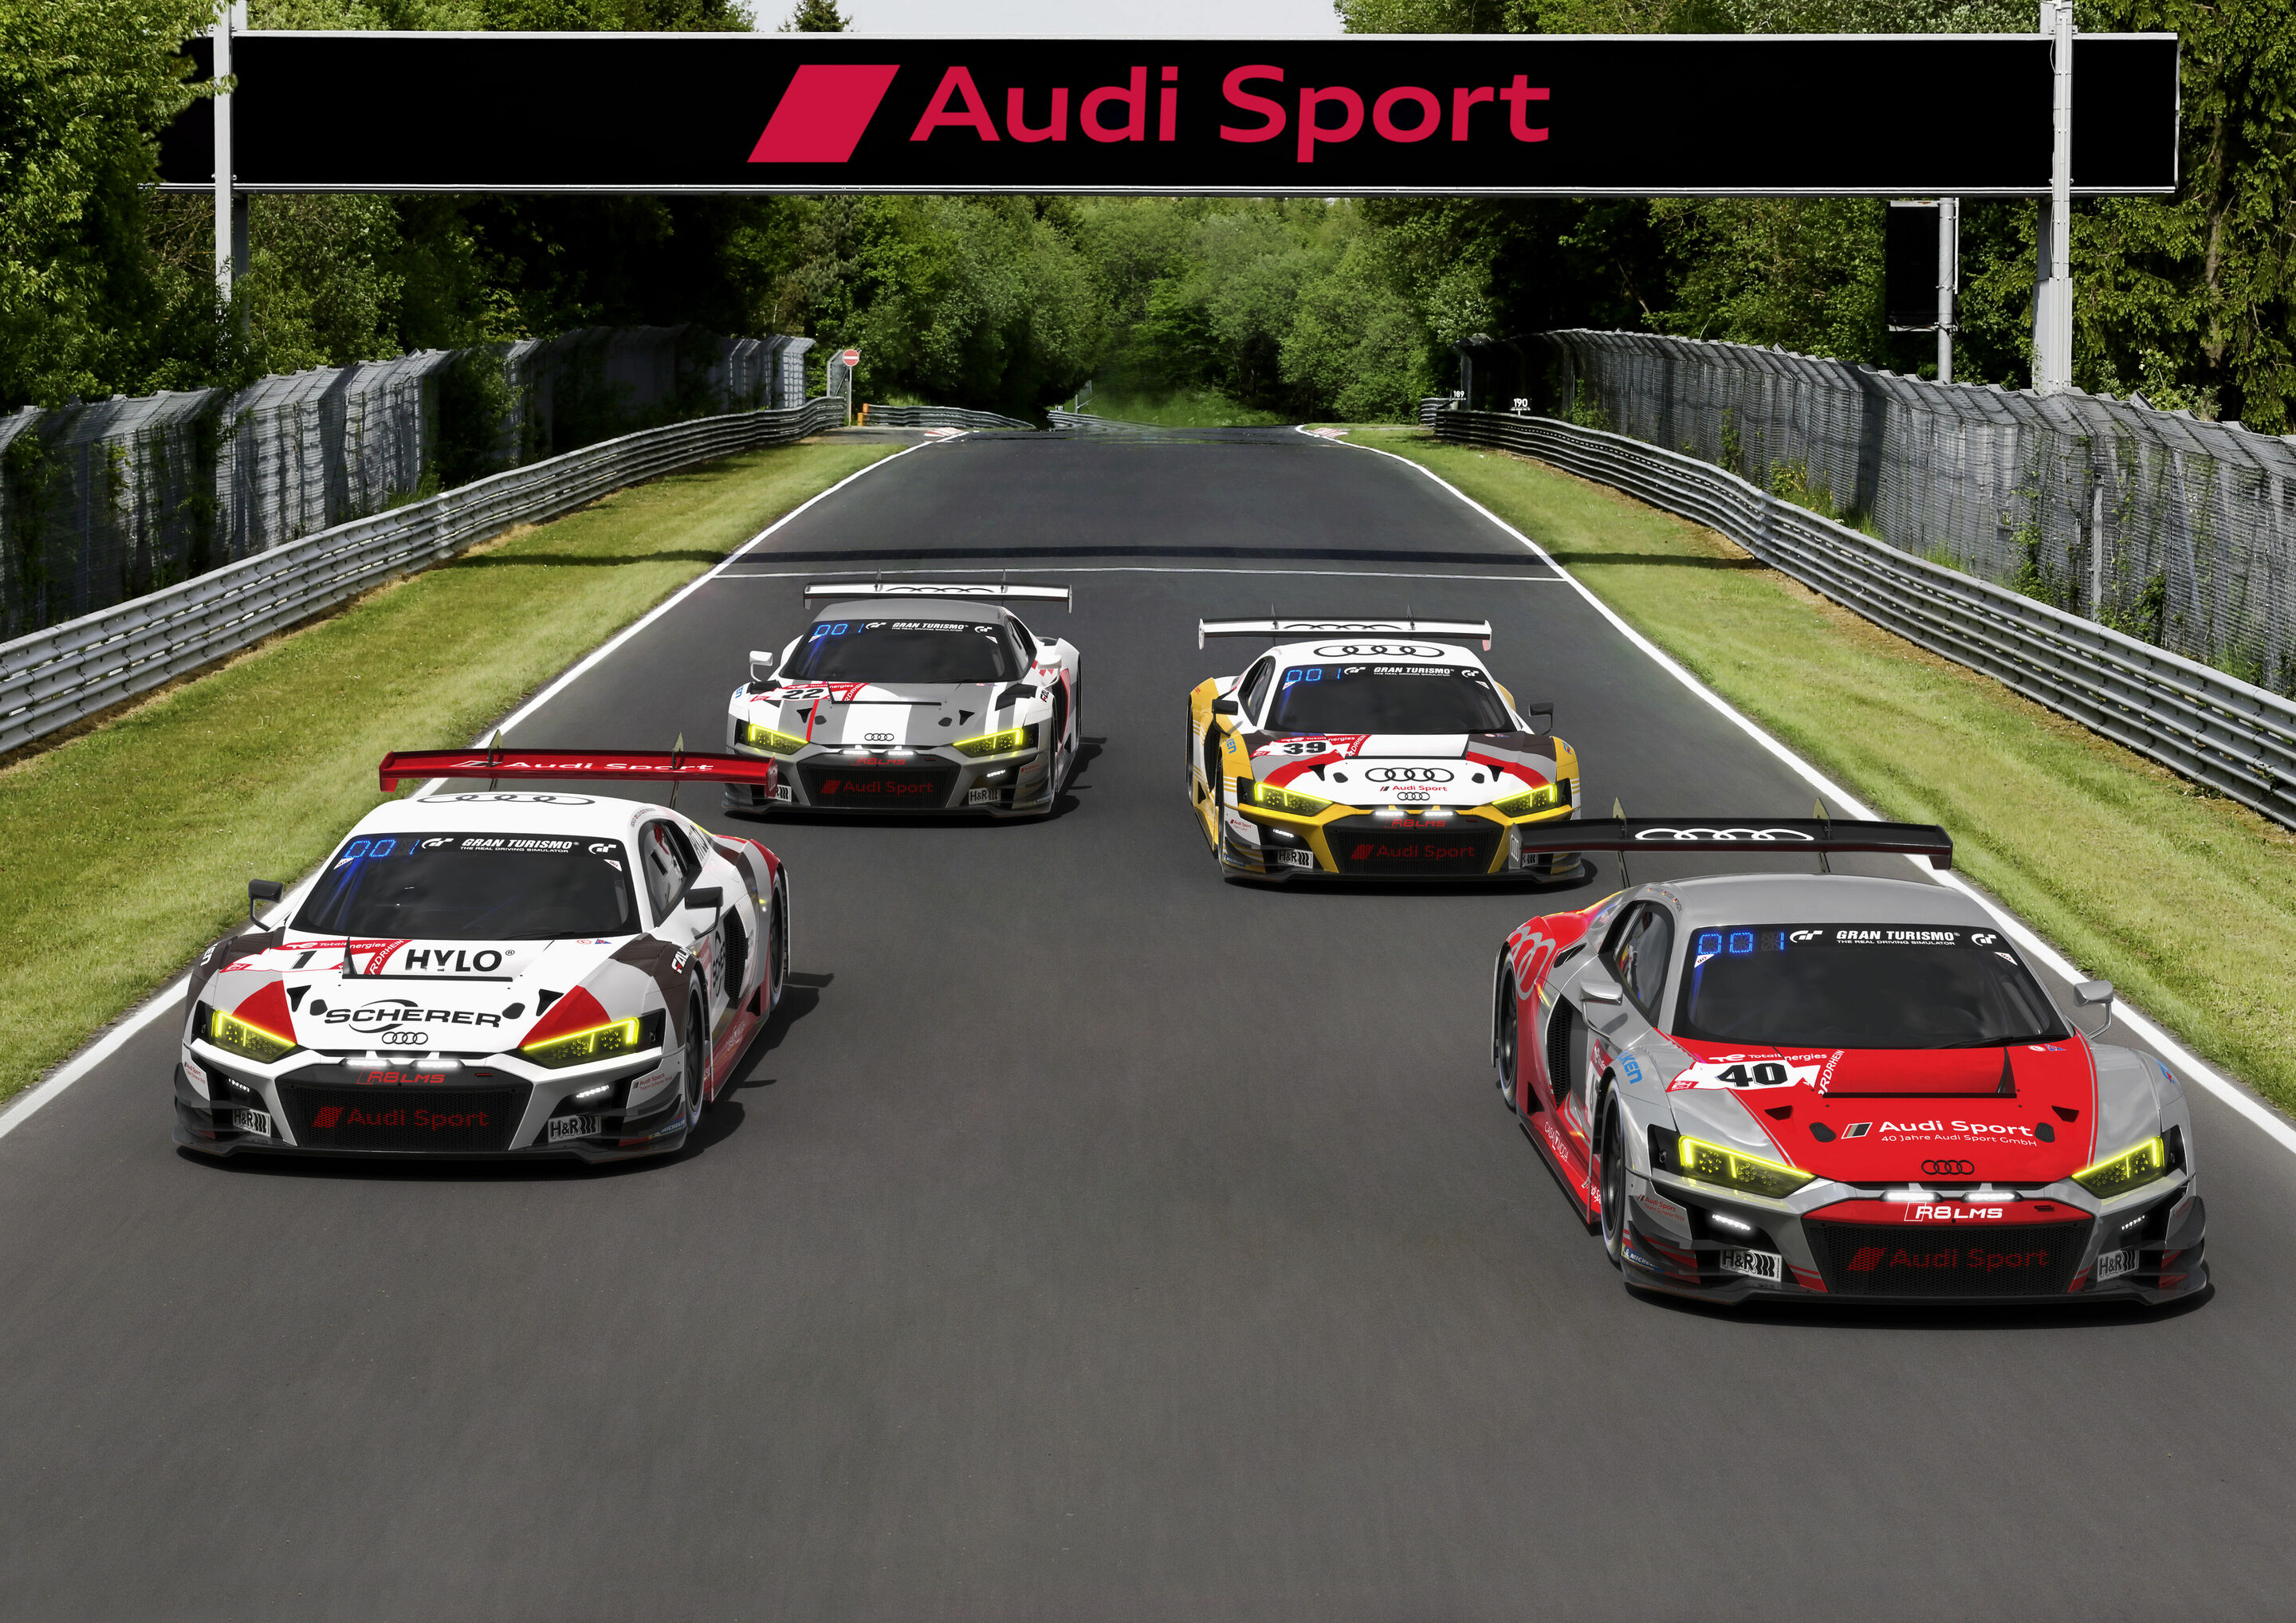 Gran Turismo 7 Update 1.36 for August 7 Comes With New Cars and Fixes